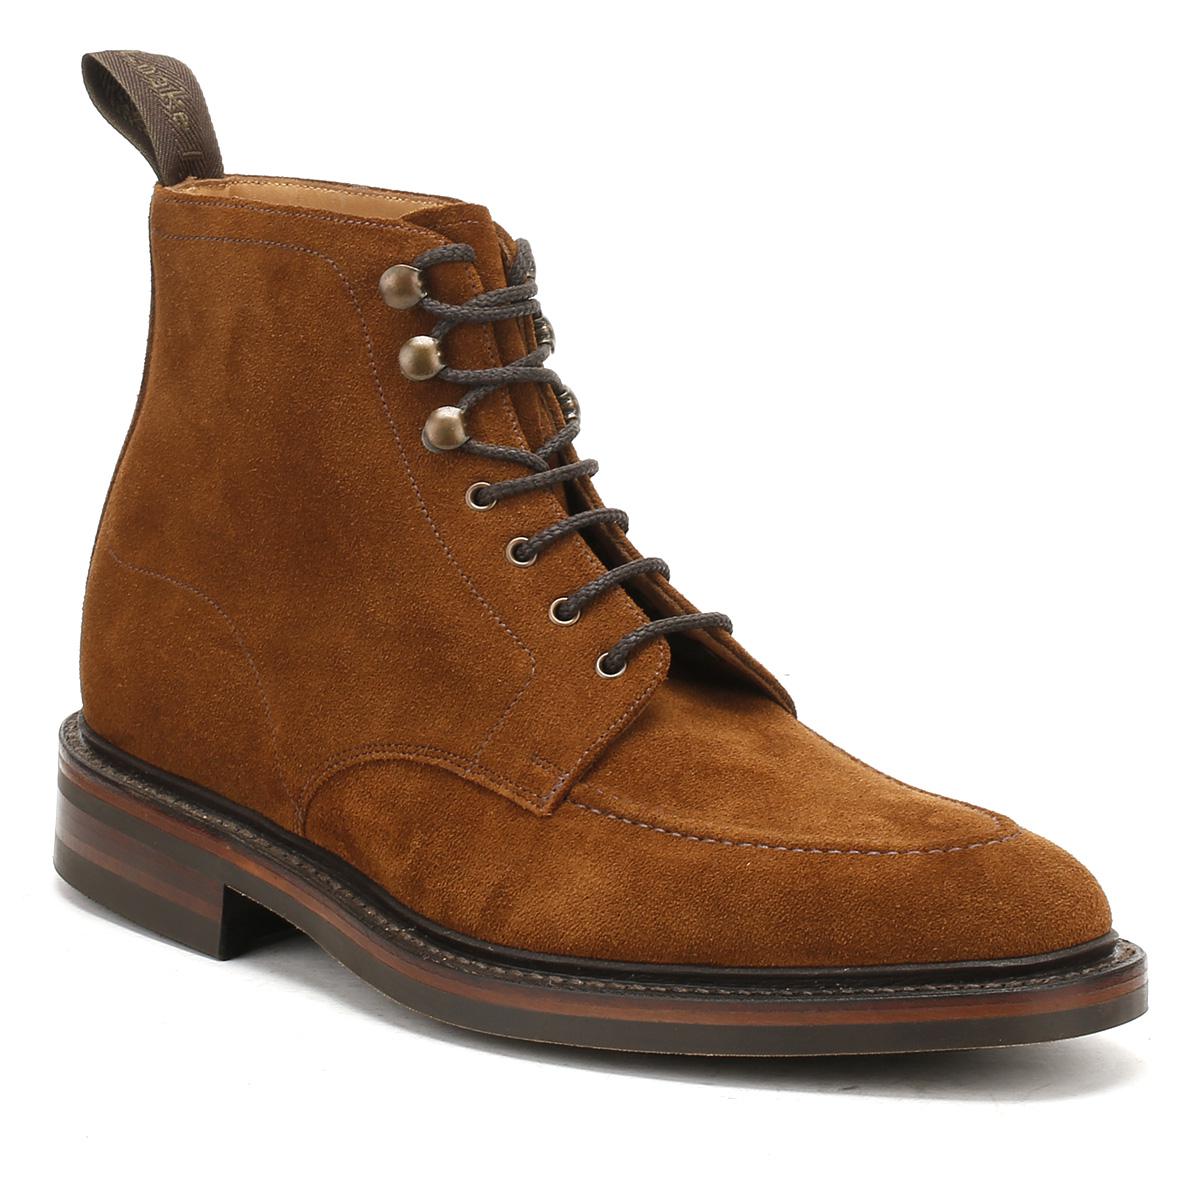 Lyst - Loake Mens Tan Suede Anglesey Boots in Brown for Men